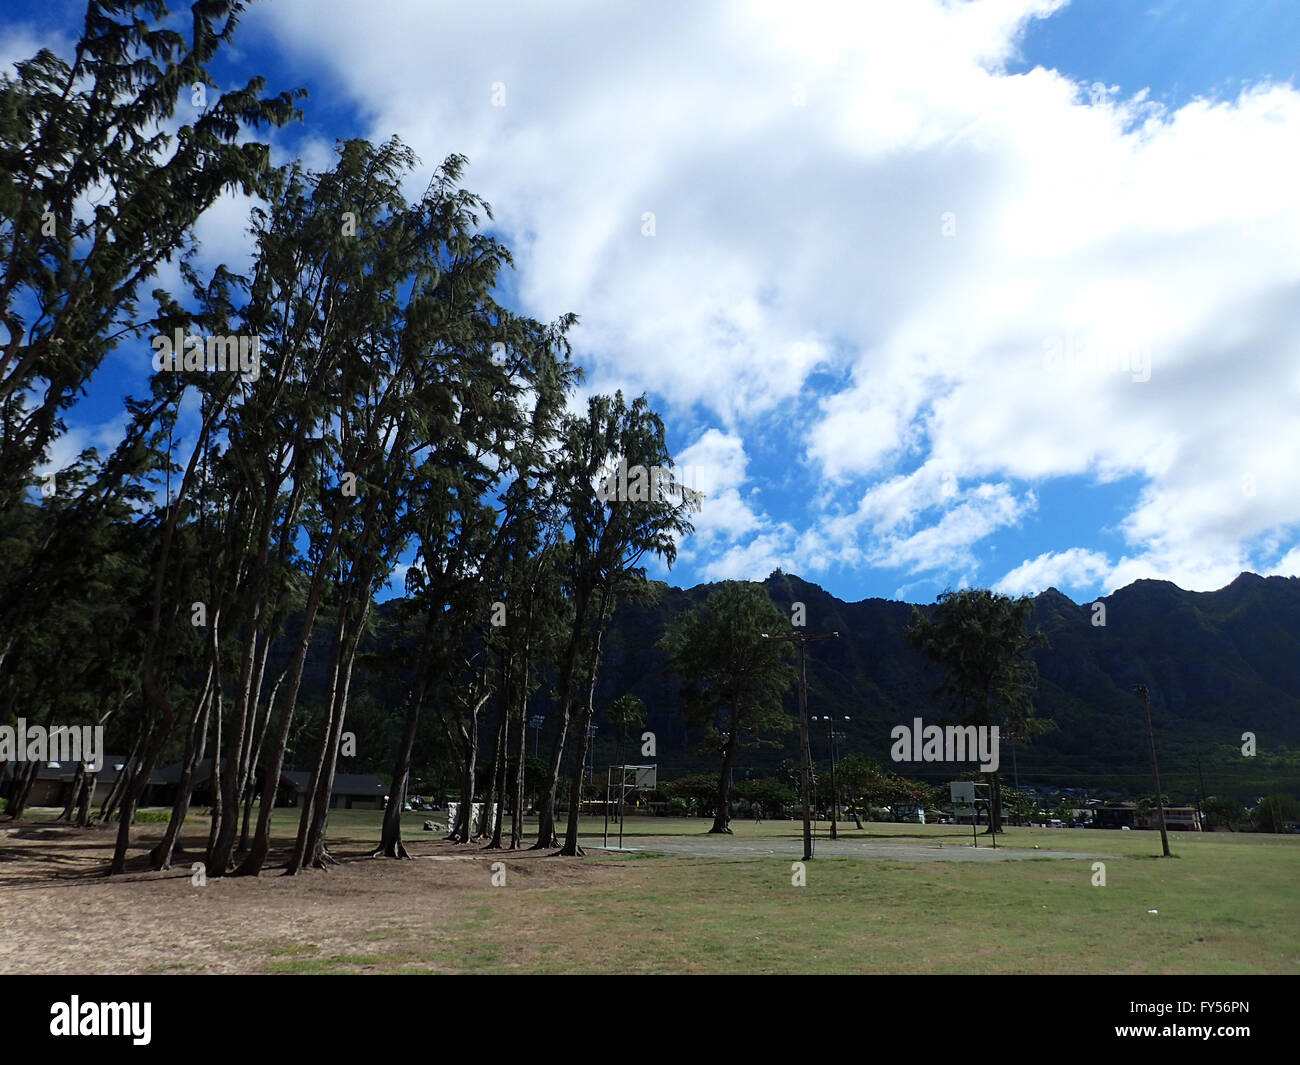 Old rusty Empty Outdoor Basketball Court next to irowood trees during the day with Mountain range in the background in Waimanalo Stock Photo